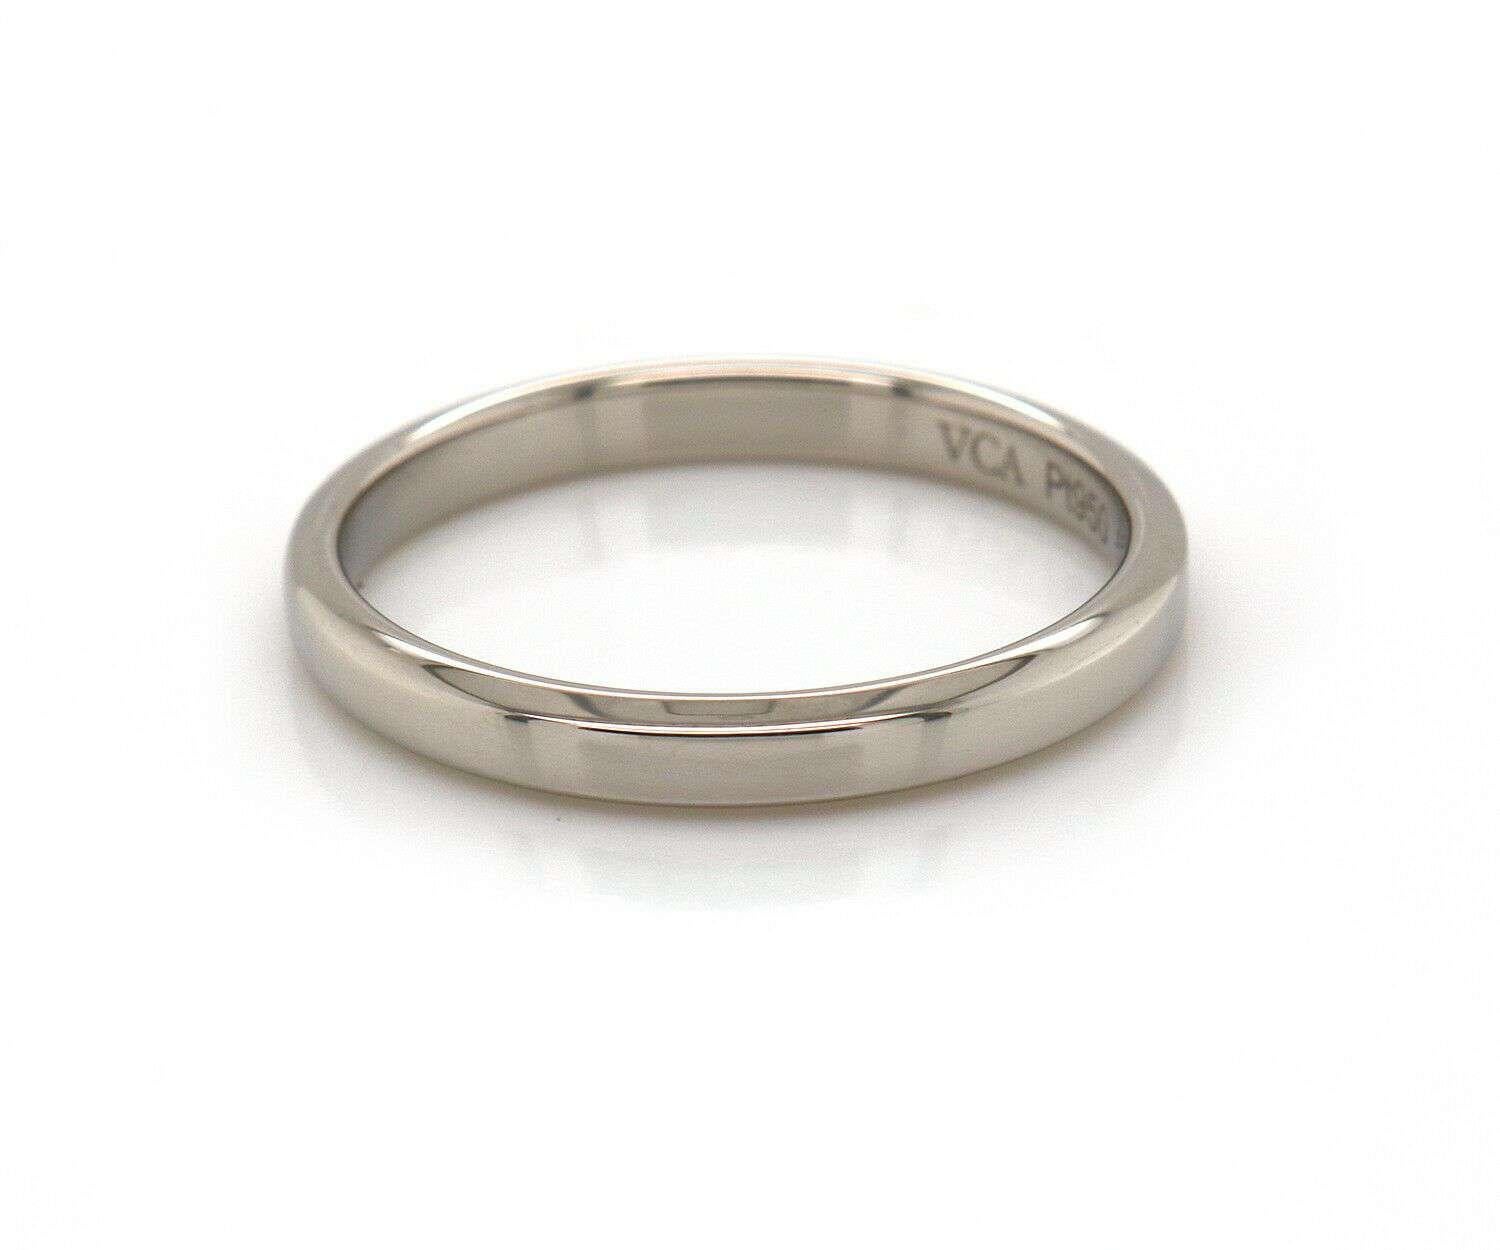 Van Cleef & Arpels Tendrement Wedding Band In Platinum

Van Cleef & Arpels Tendrement Wedding Band
.950 Platinum
Band Width: Approx. 2.0 MM
Ring Size: 6.5 (US)
Weight: Approx. 3.60 Grams
Stamped: VCA, Pt950, 53, JA732891

Condition:
Offered for your